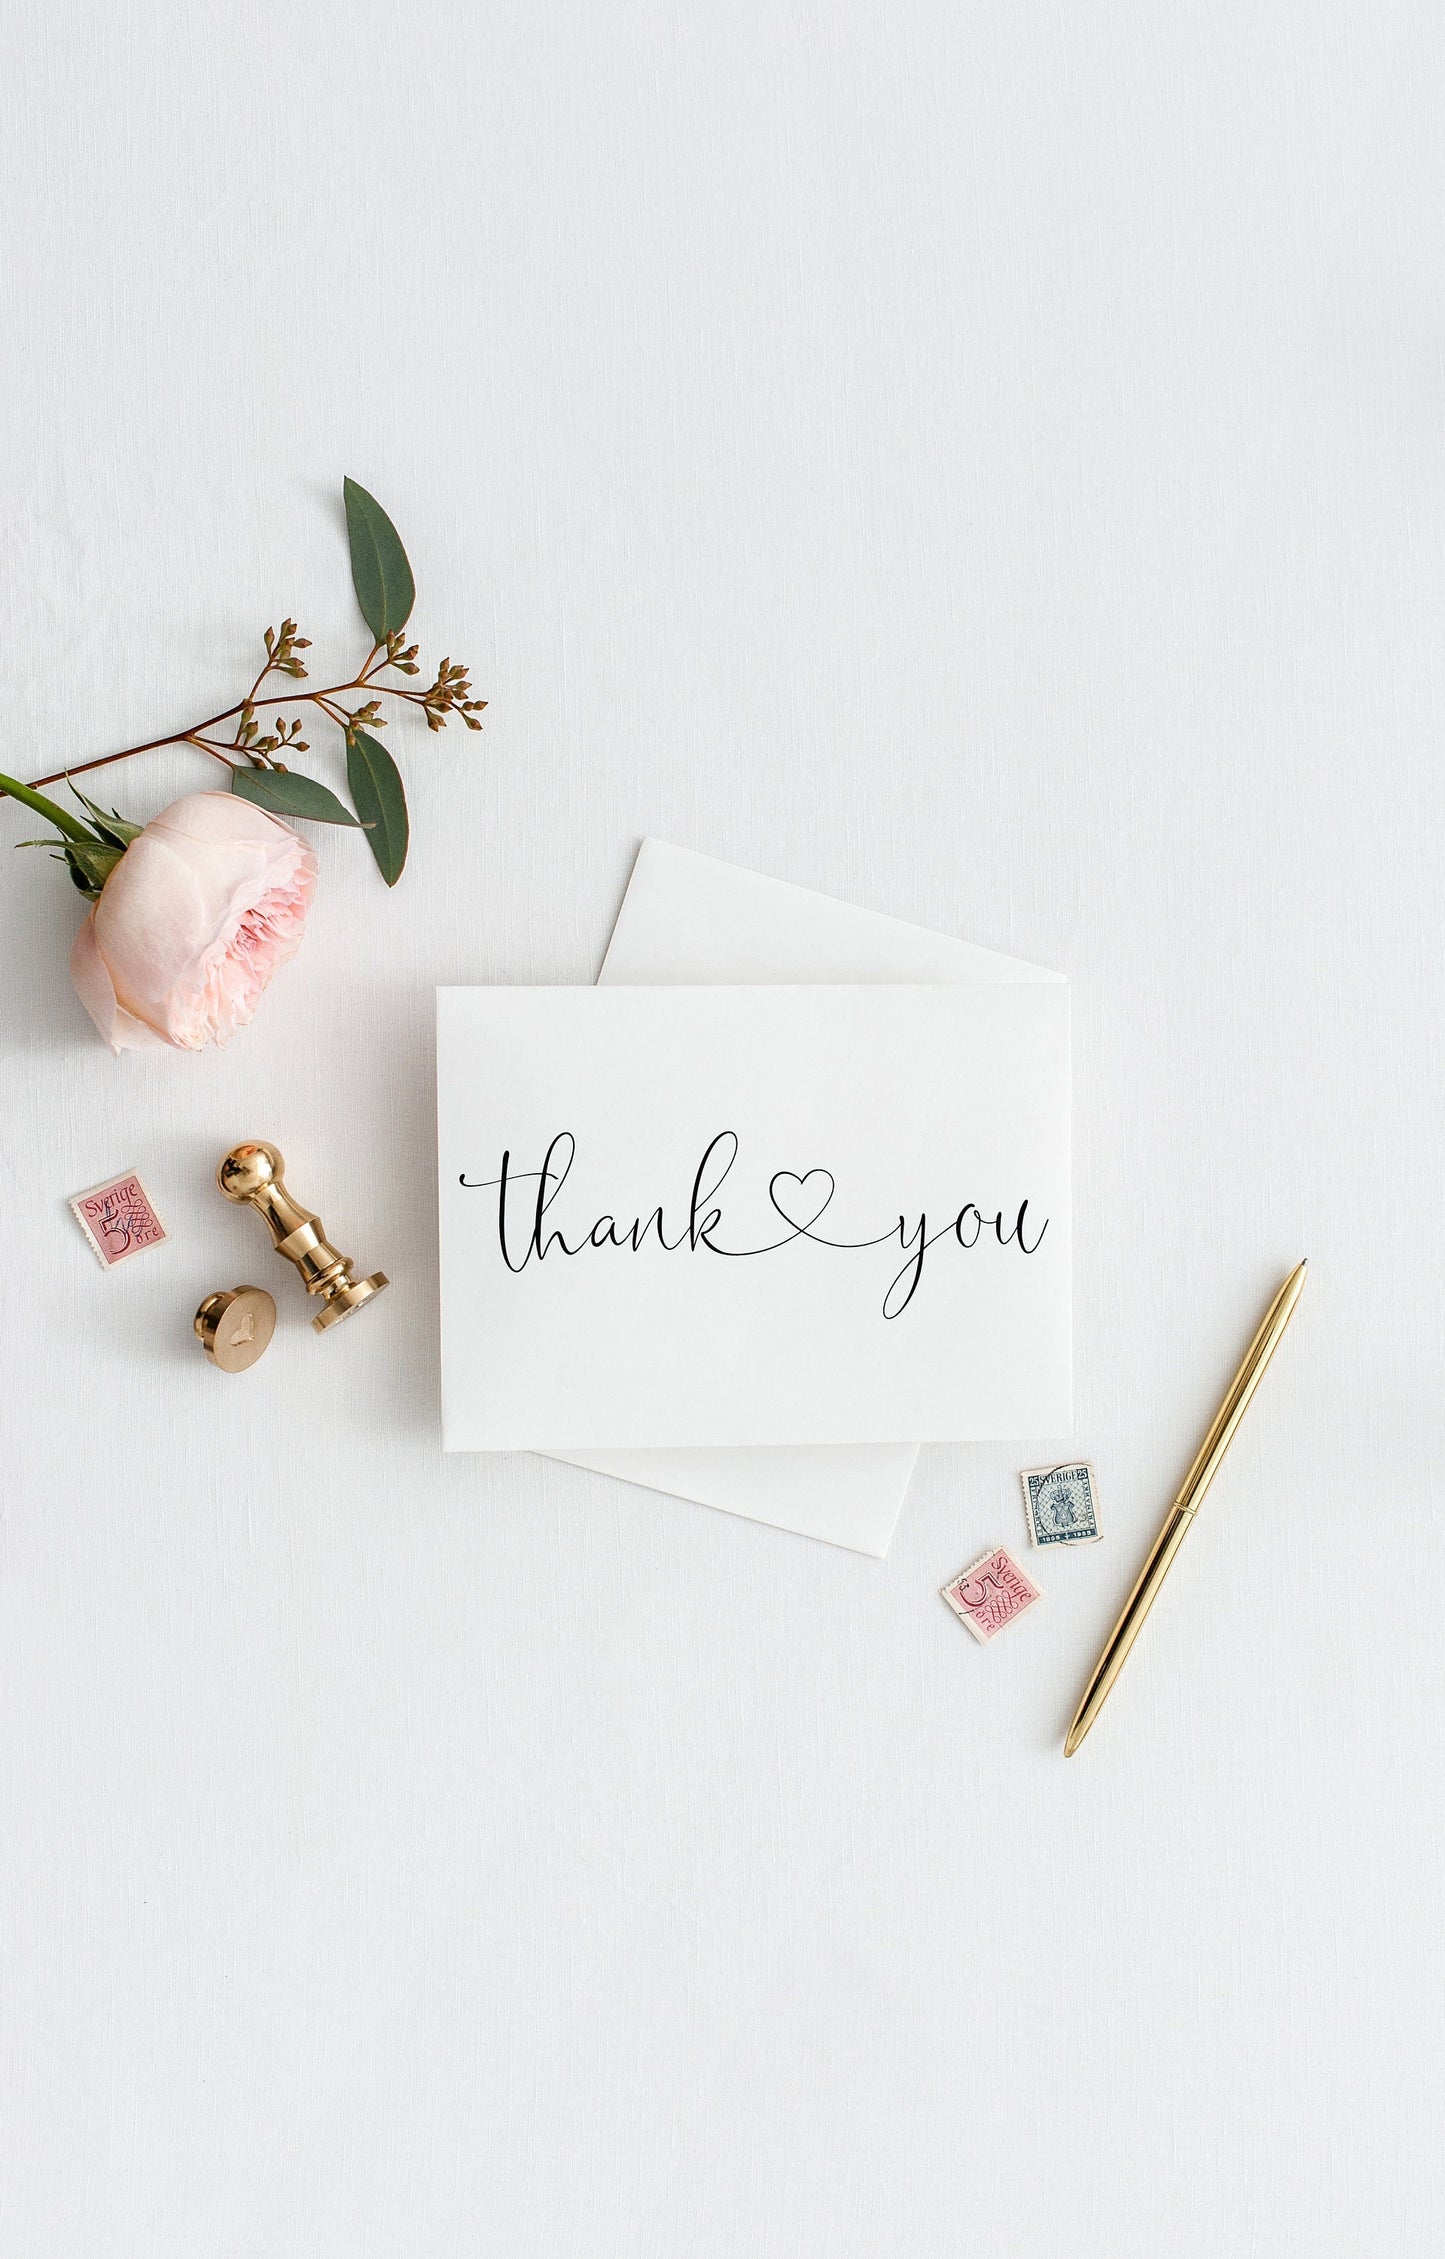 Simple Wedding Thank You Card, Instant Download, Thank you Cards, Printable Thank You, Wedding Cards, Calligraphy, Rustic, Heart  - Heather TAGS | TY | INSERTS SAVVY PAPER CO